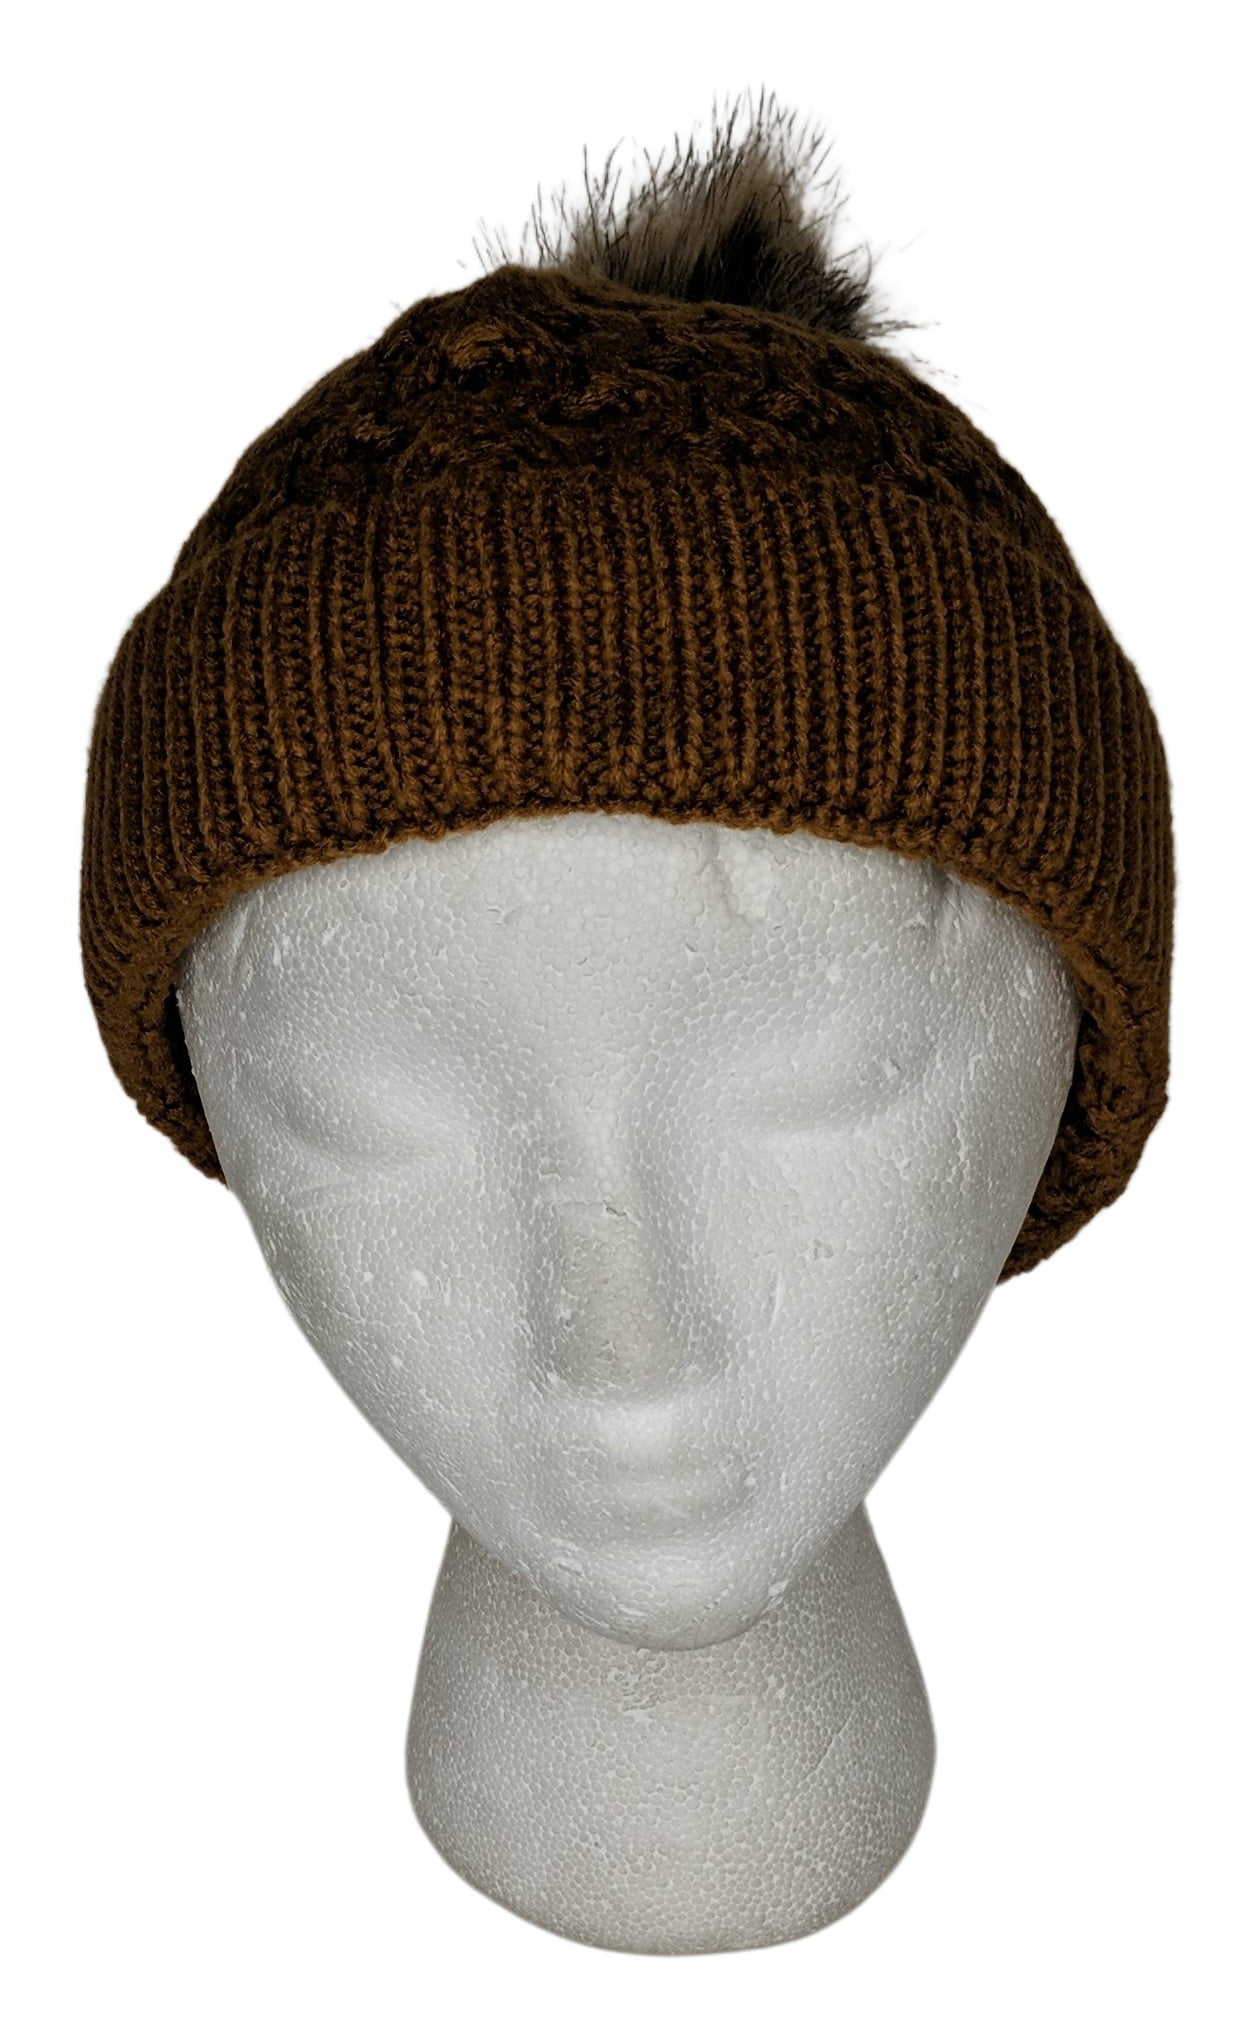 Gray Savage Embroidery Unisex Knit Winter Warm Skull Hat Fold-Up Beanie Cap 